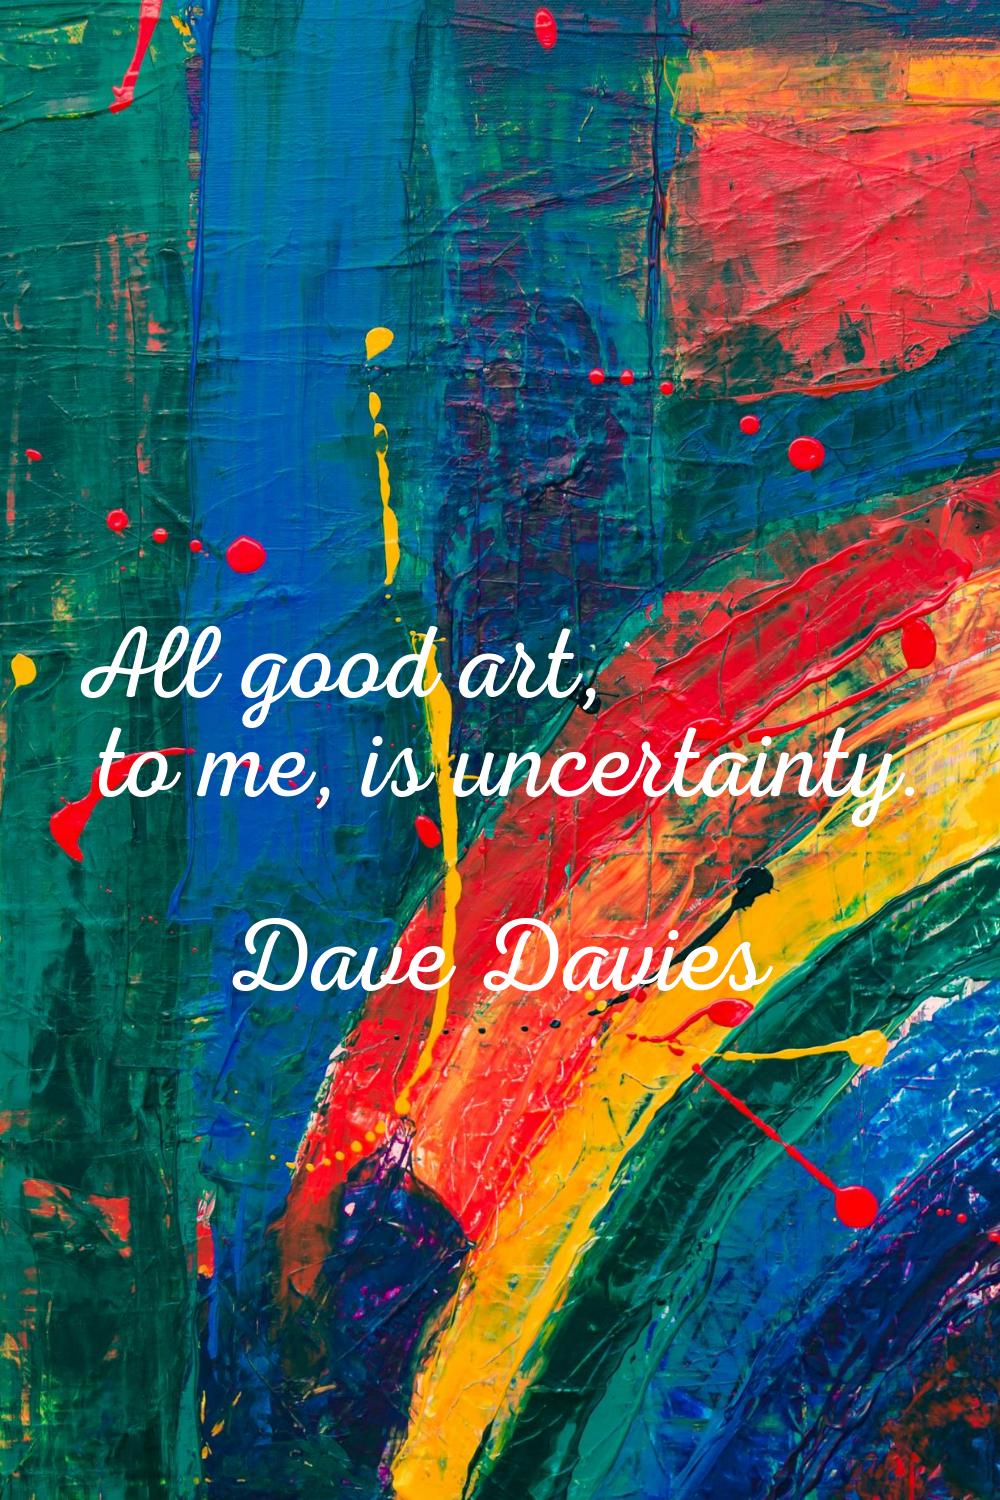 All good art, to me, is uncertainty.